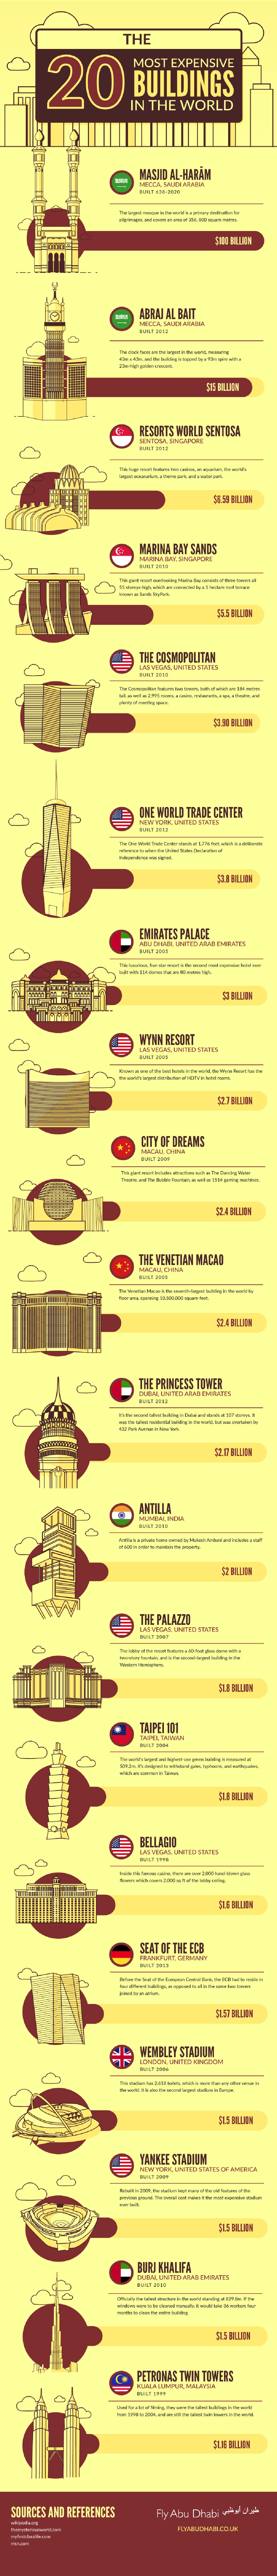 Most Expensive Buildings in the World - Architecture Infographic